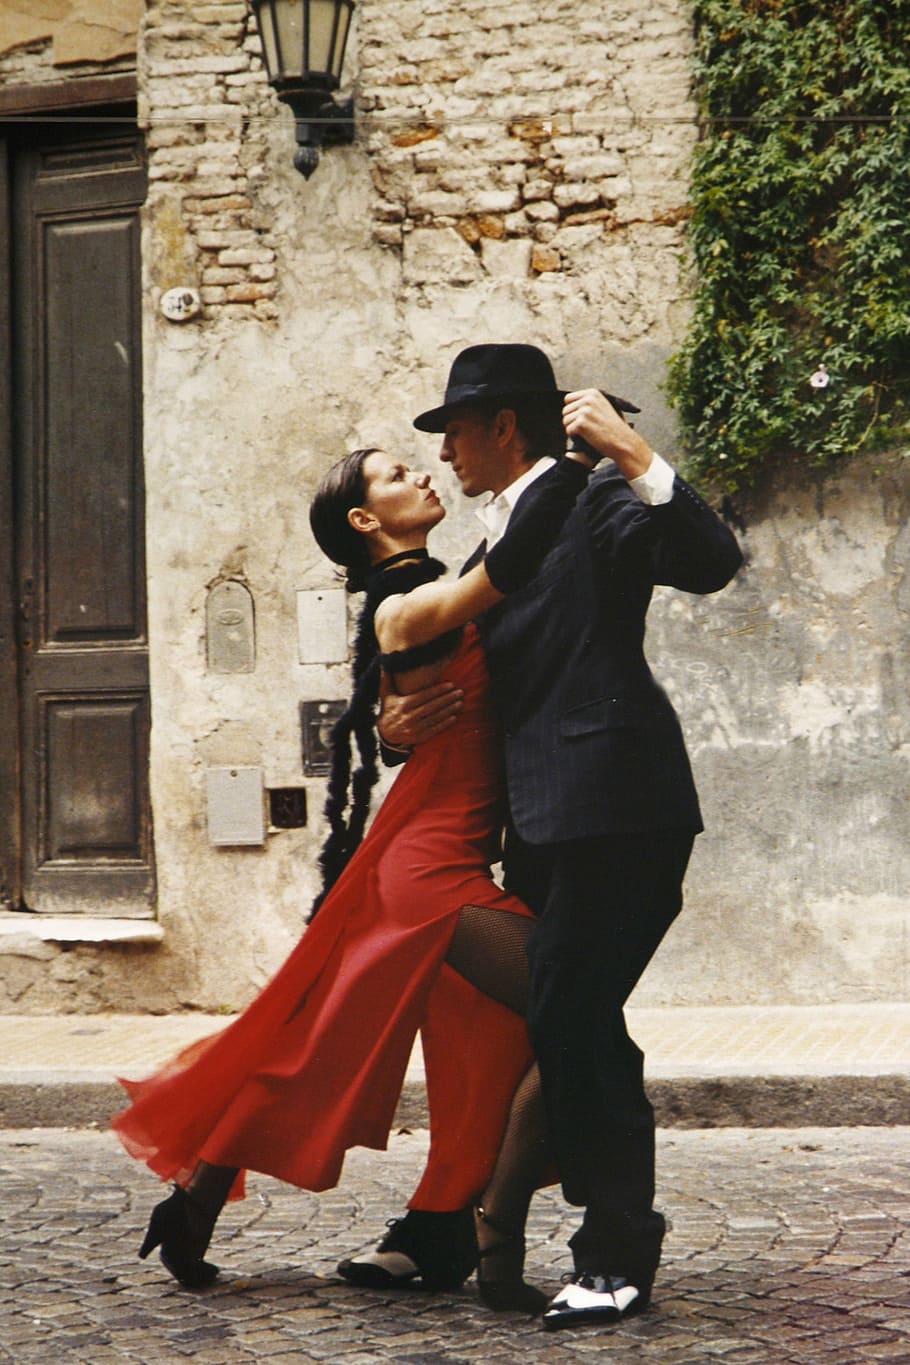 man in black suit and woman in red slit dress dancing beside grey concrete wall